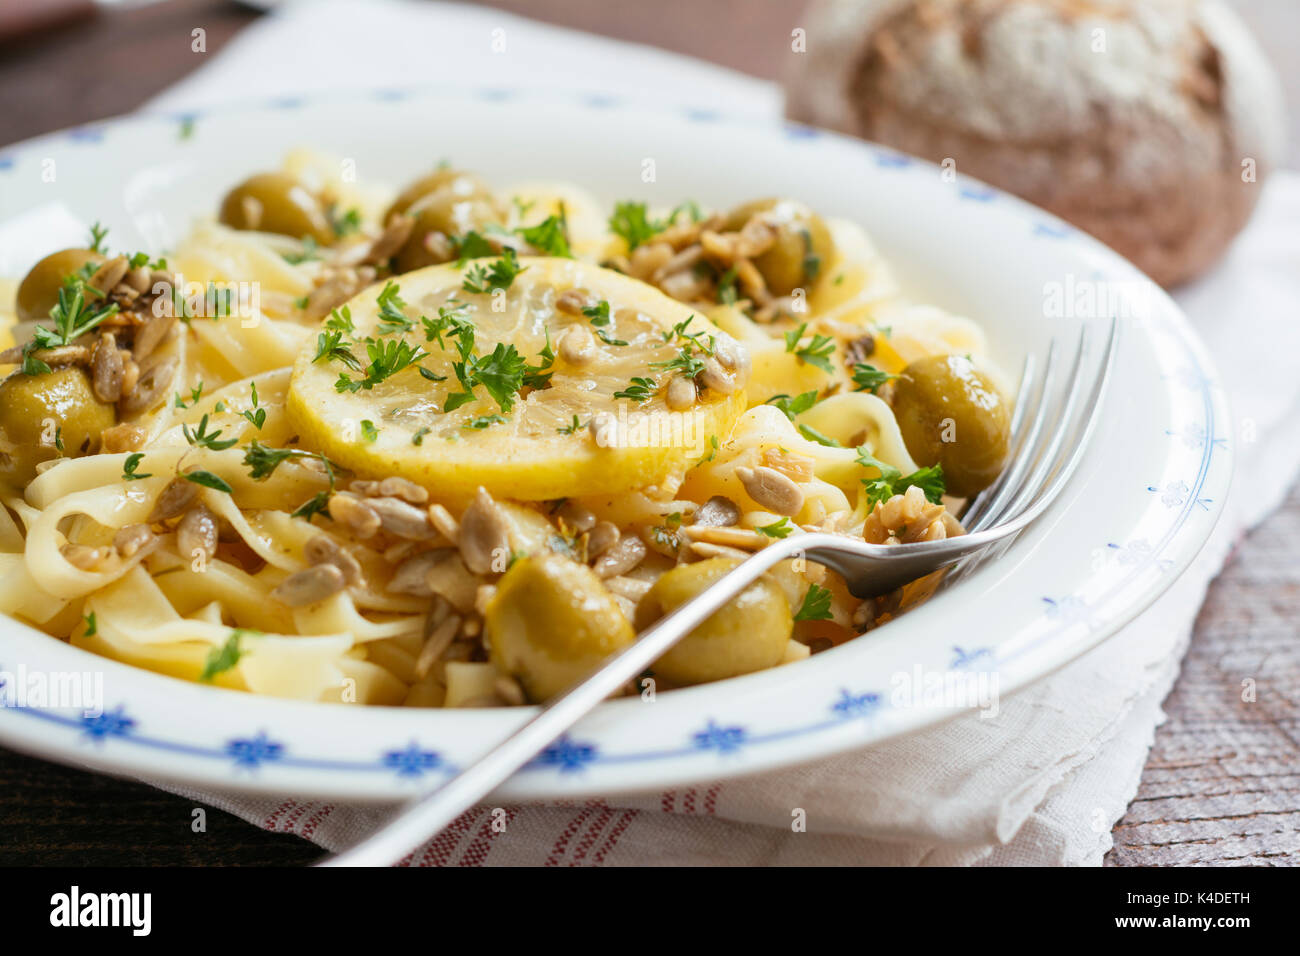 Sicilian tagliatelle pasta with lemon, garlic and olives, garnished with sunflower seeds. Stock Photo